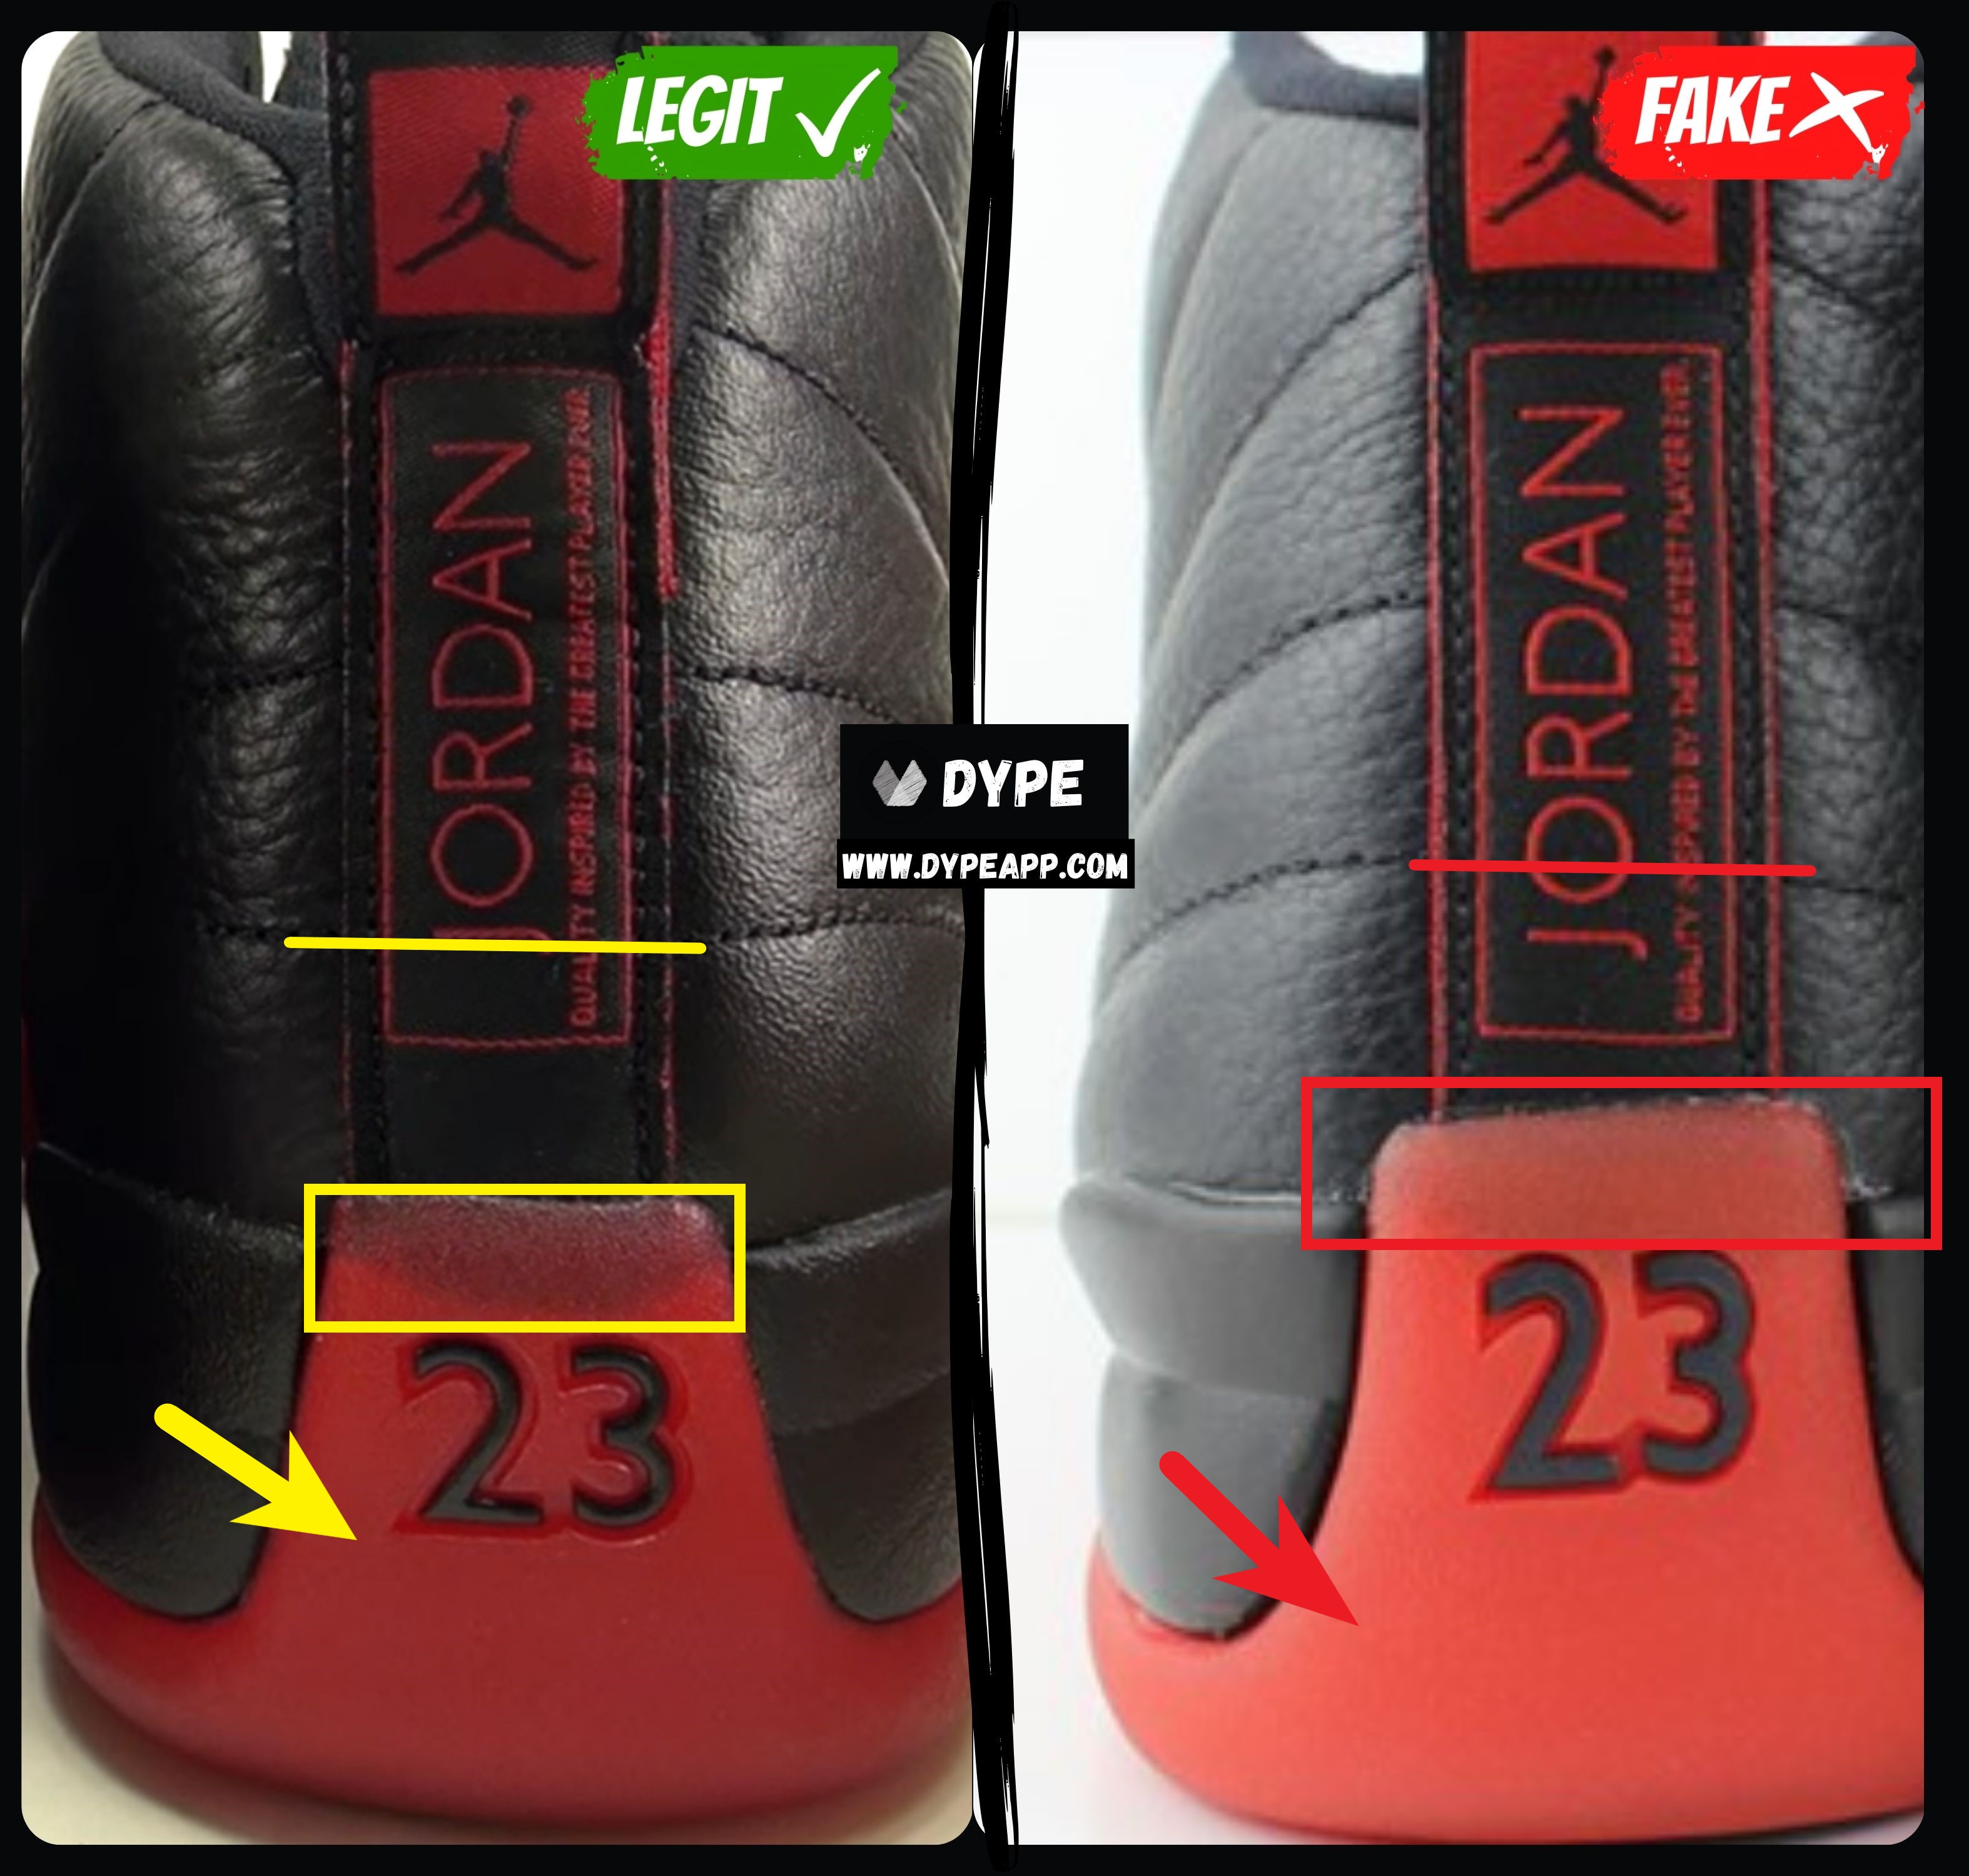 how to tell if the jordan 12s are fake